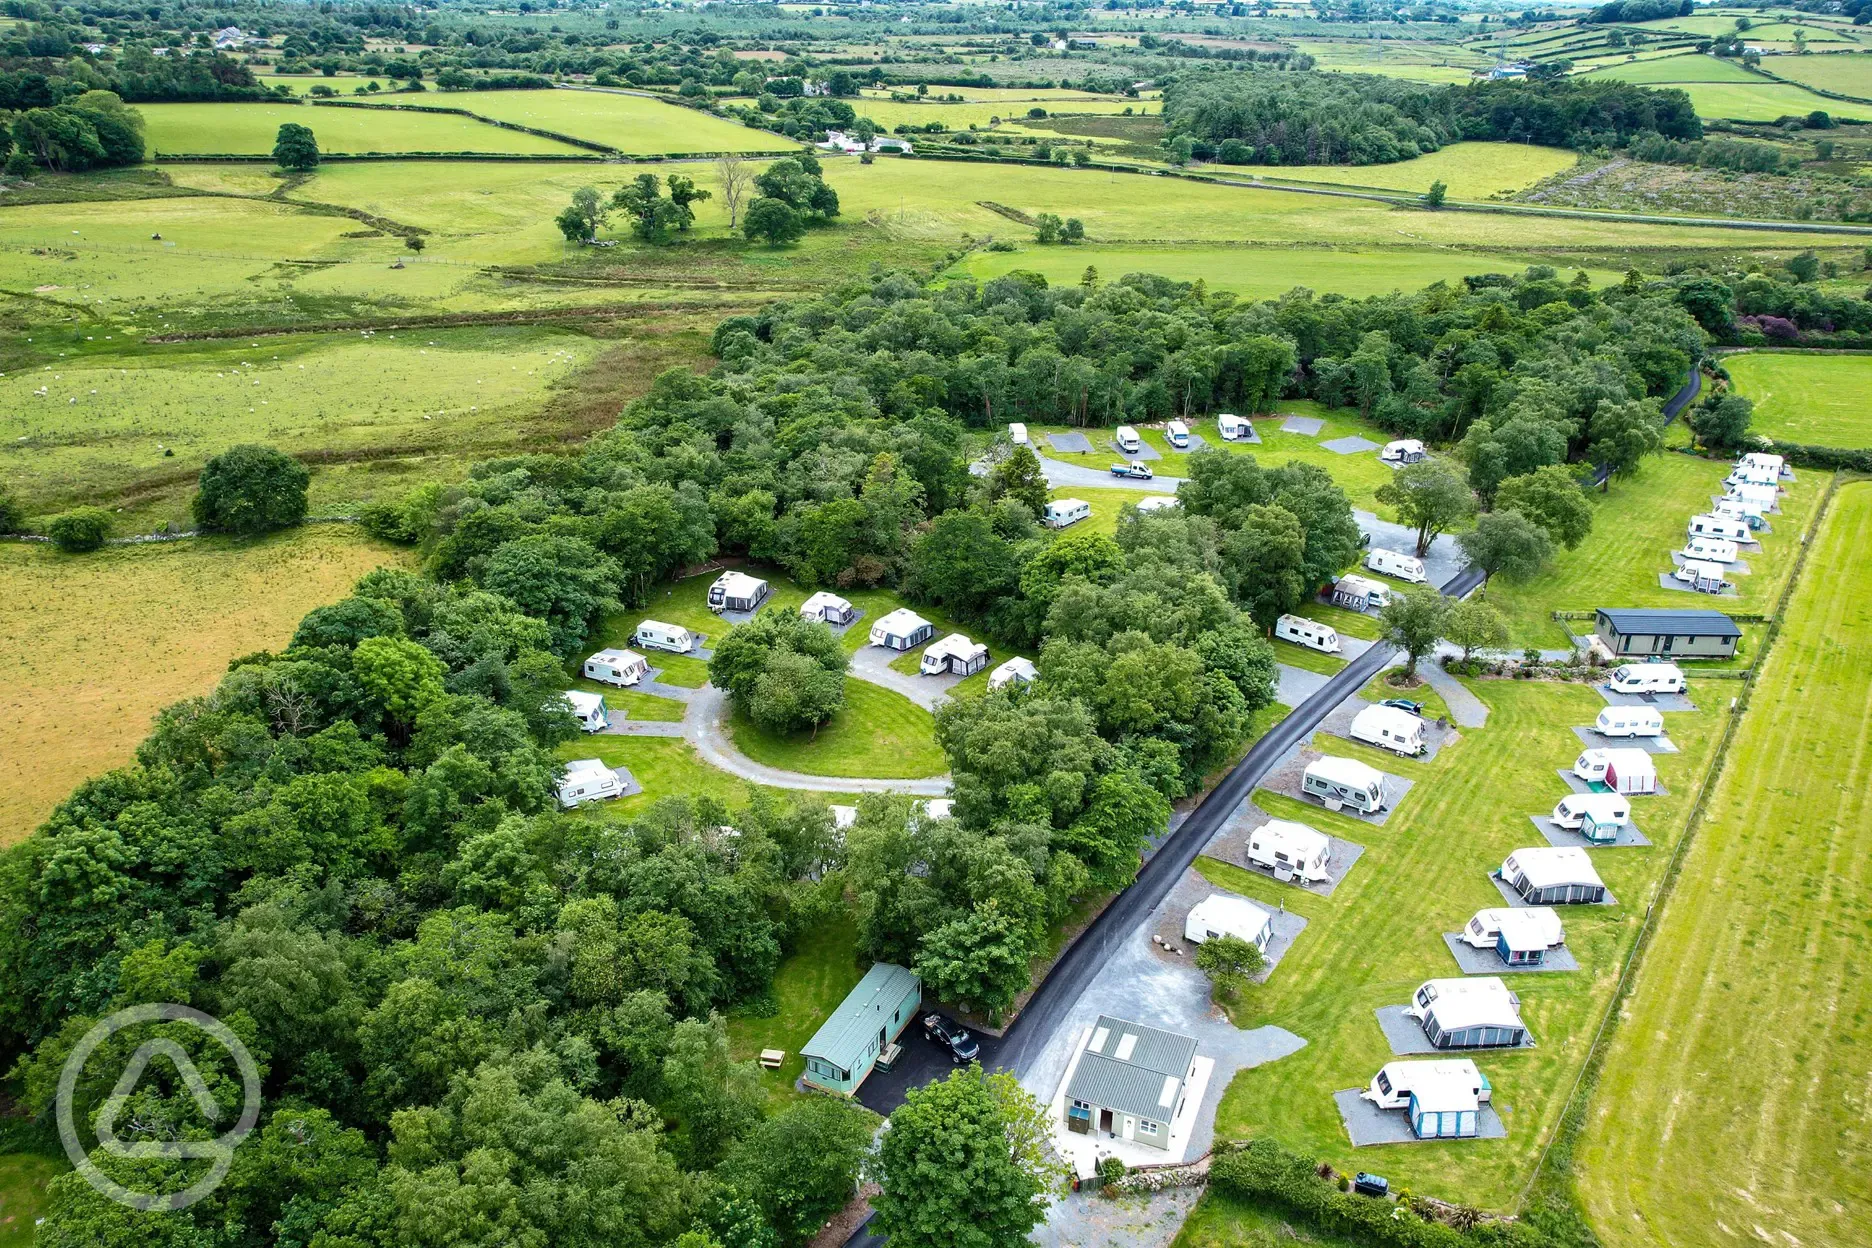 Aerial view of the campsites and woodland area